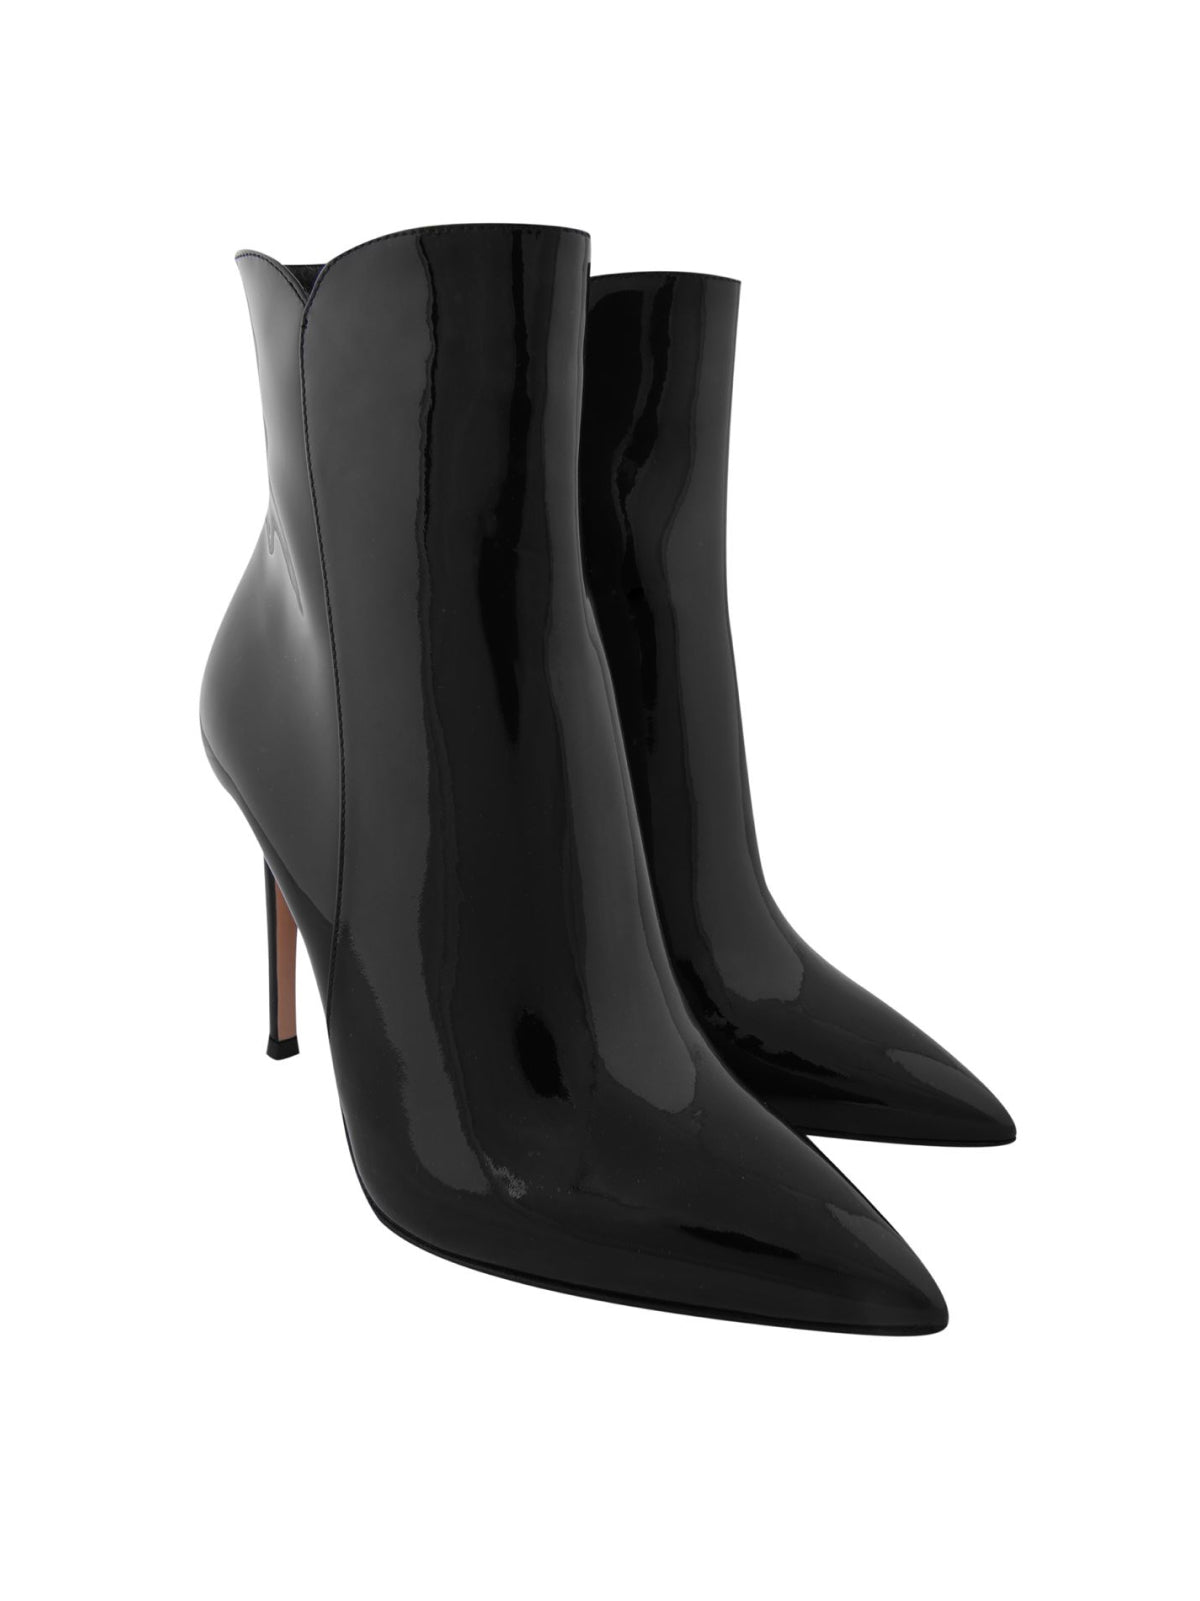 Gianvito Rossi-OUTLET-SALE-Levy 105 Patent Leather Boots-ARCHIVIST